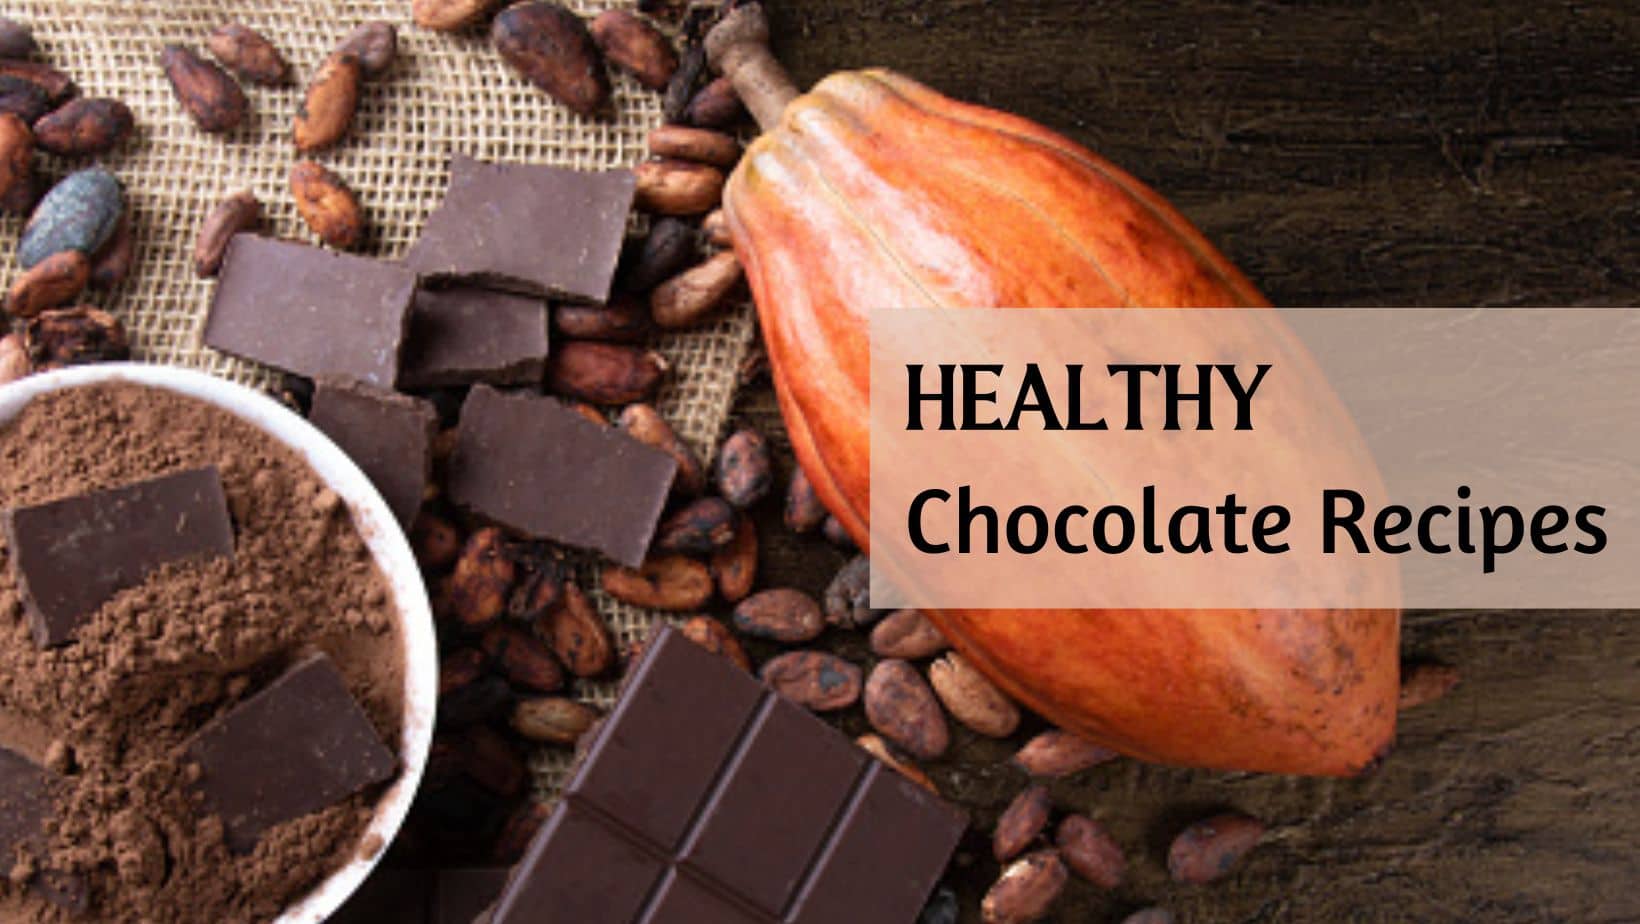 3 Healthy Chocolate Recipes To Satisfy Your Sugar Cravings